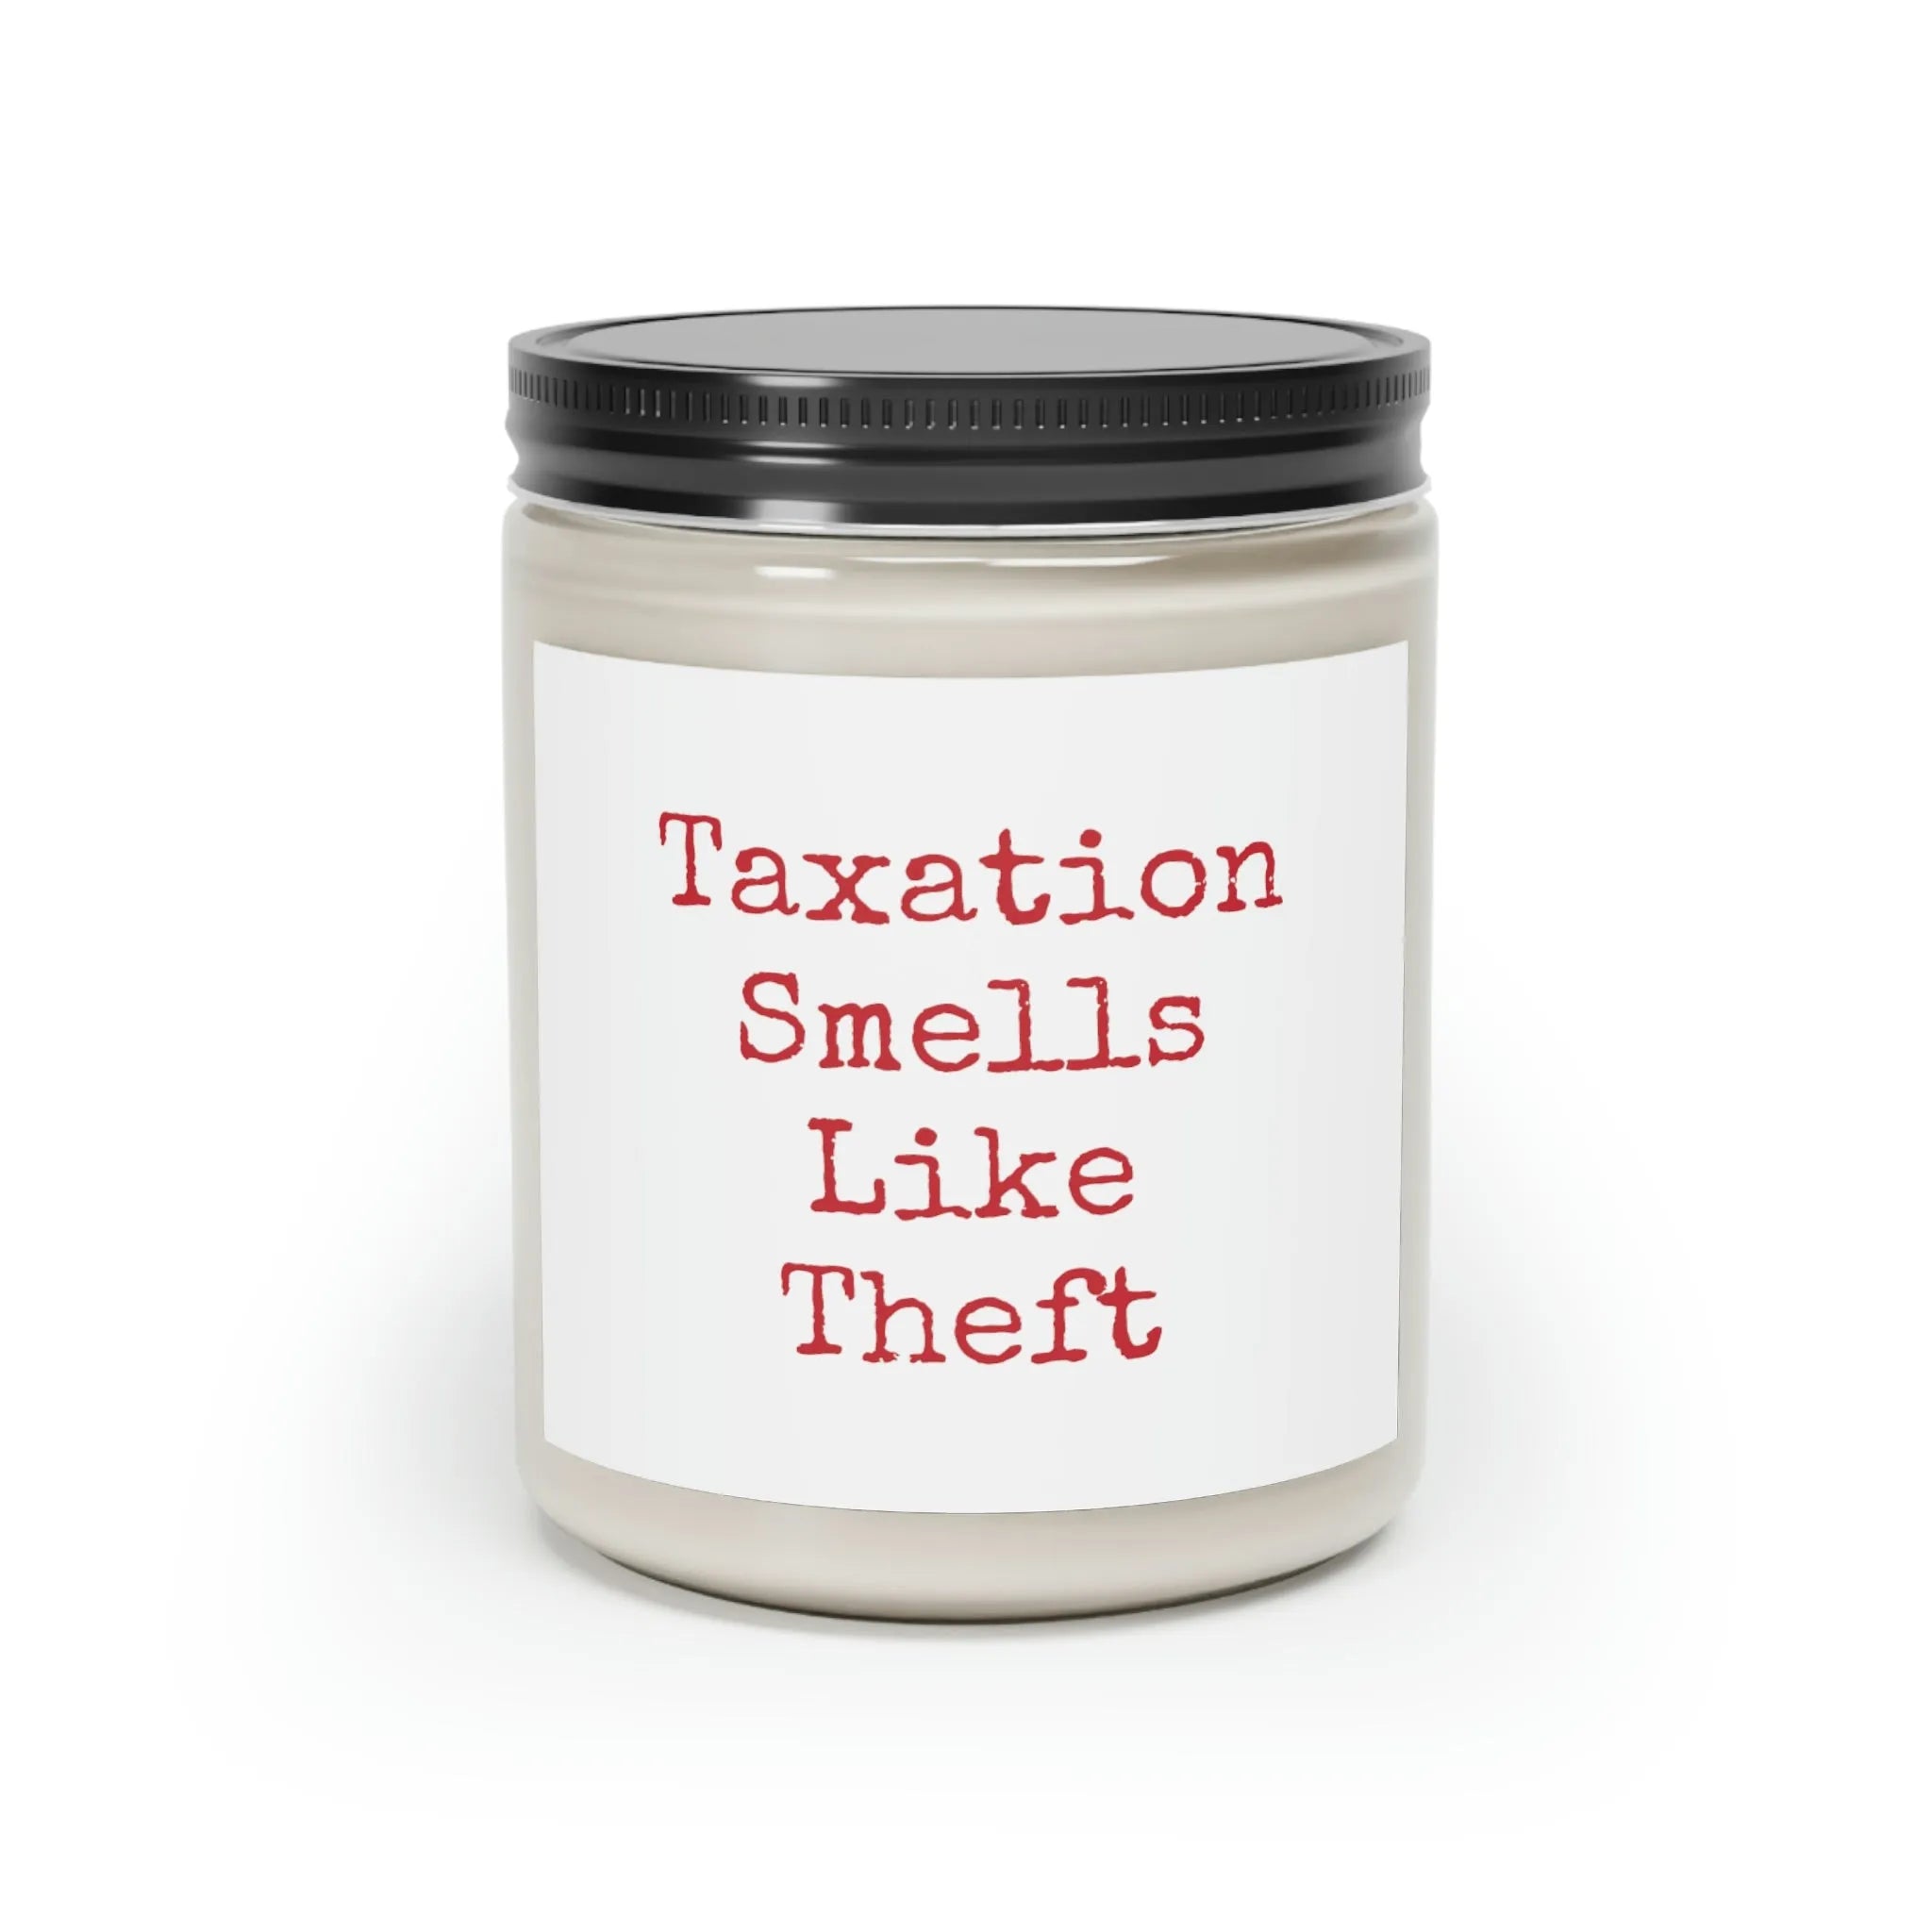 Taxation Smells Like Theft Scented Candle, 9oz